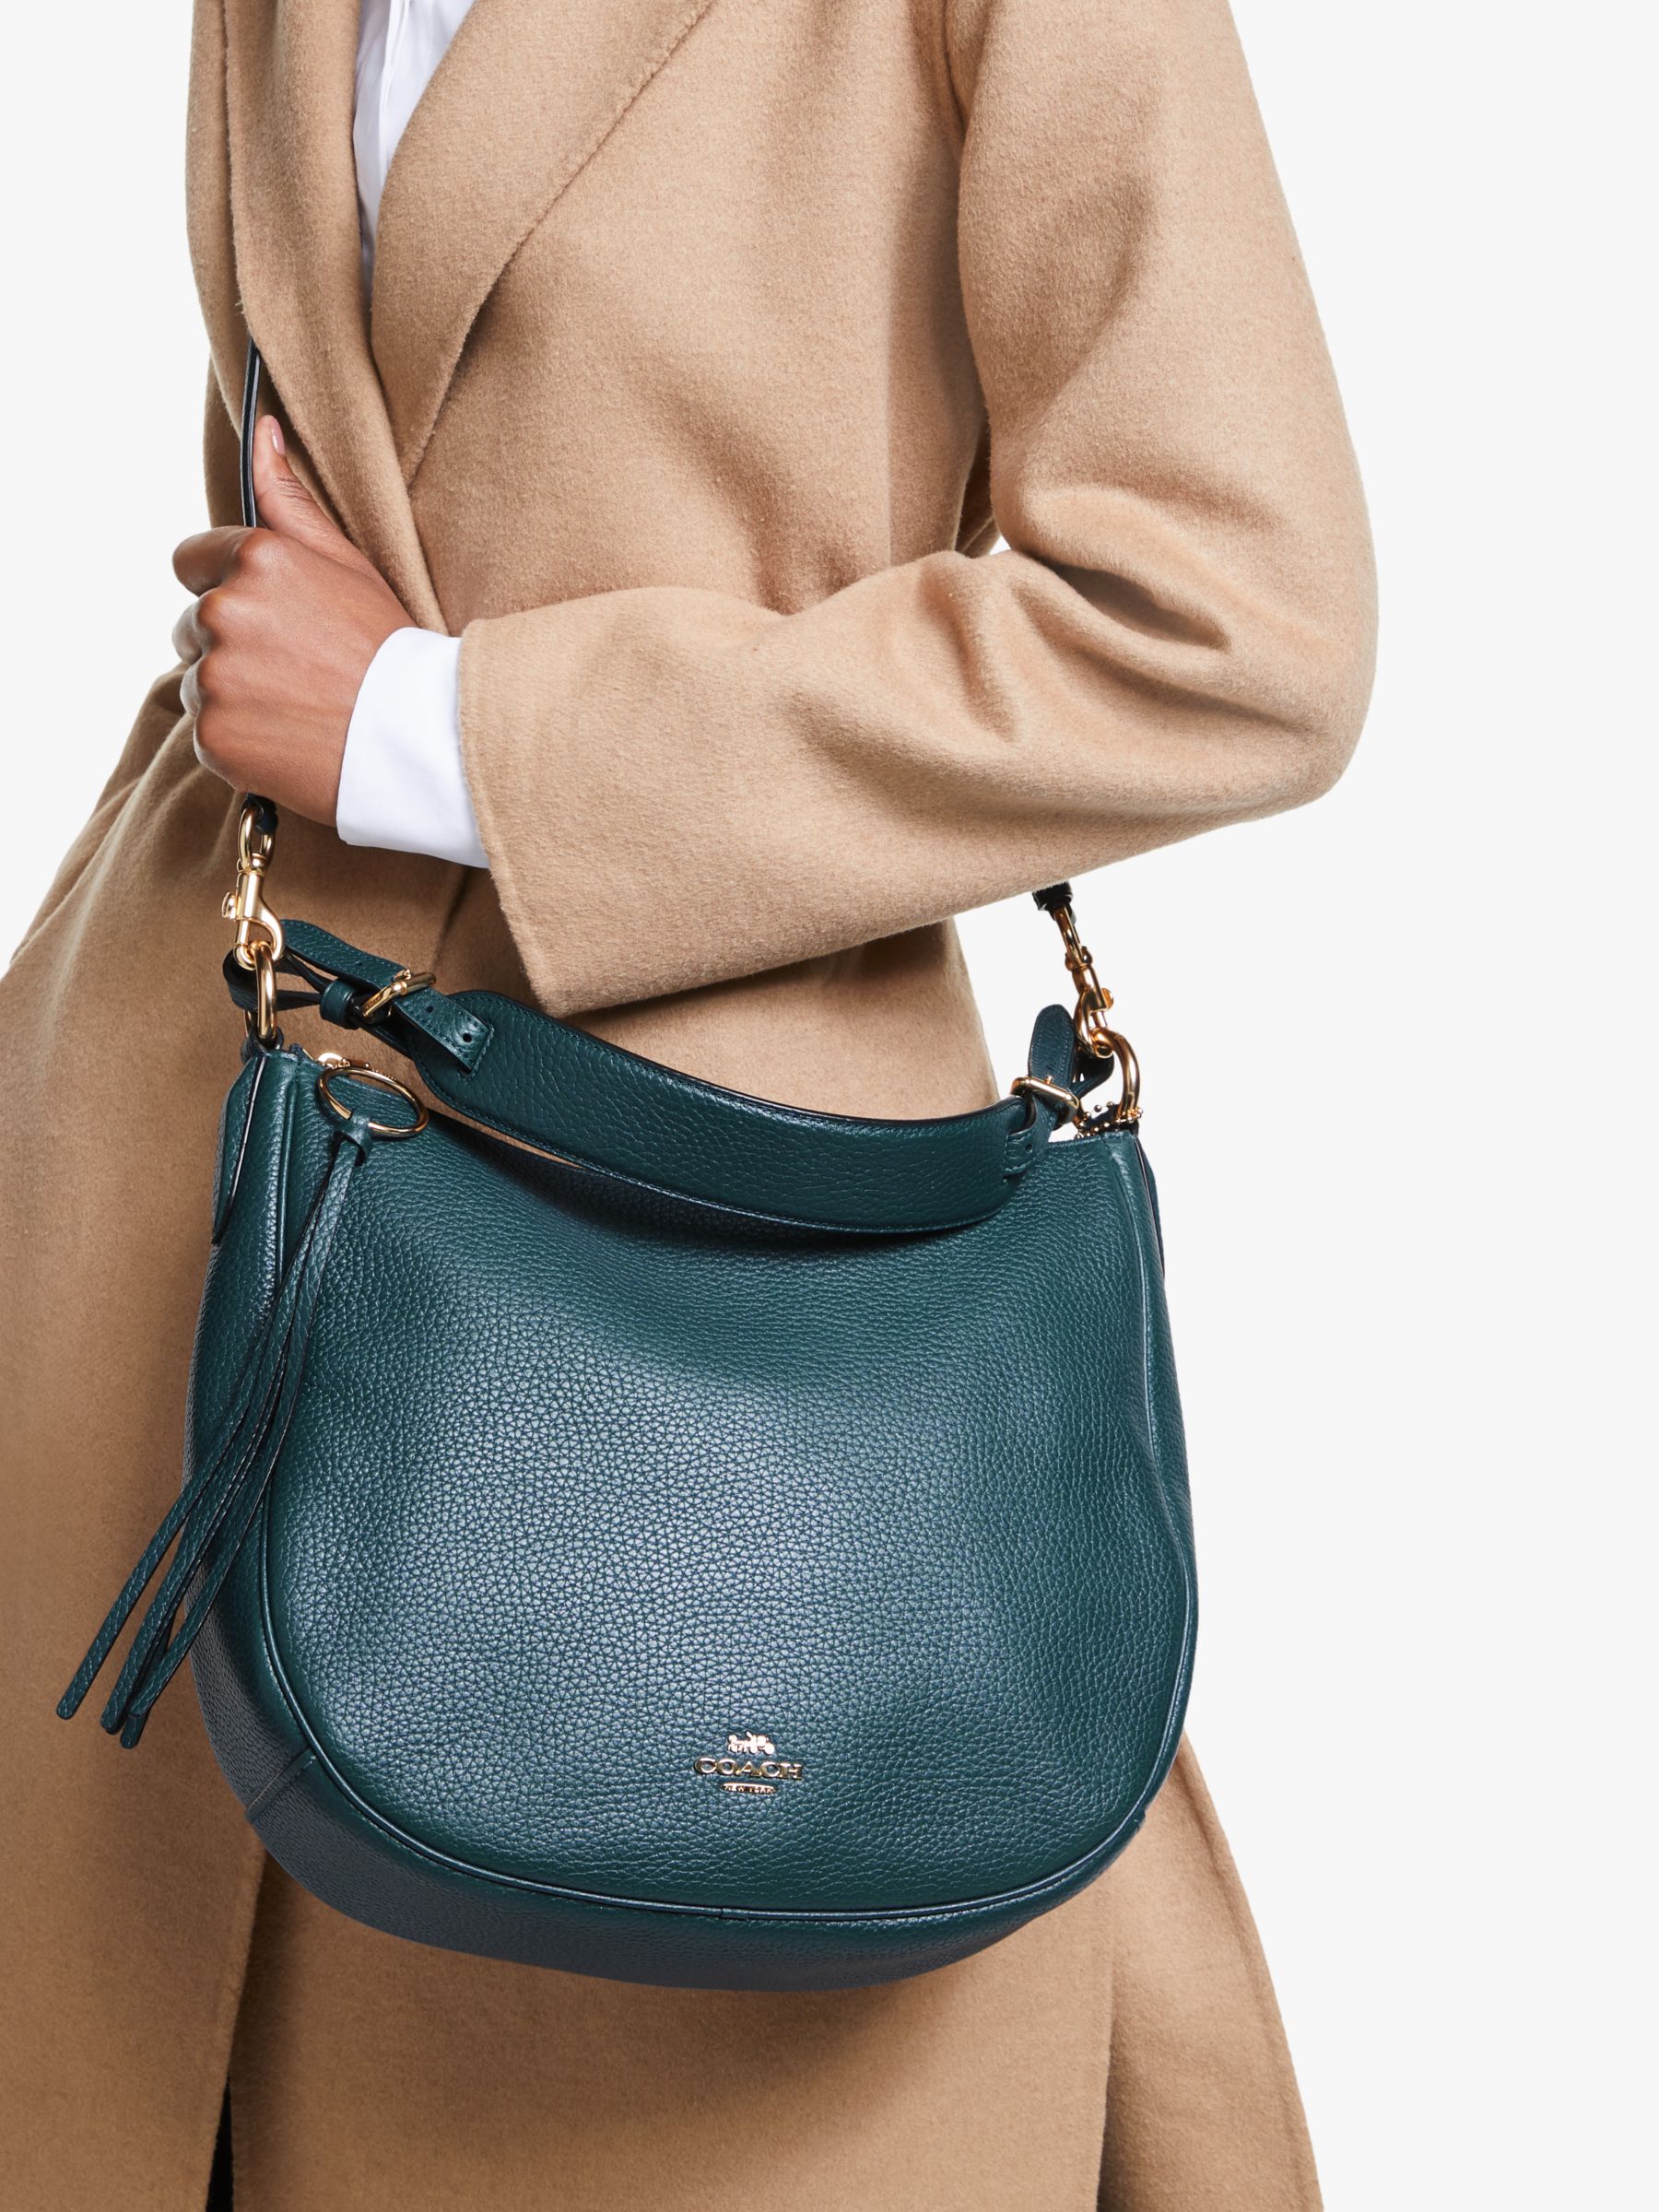 Coach Sutton Pebbled Leather Hobo Bag at John Lewis & Partners